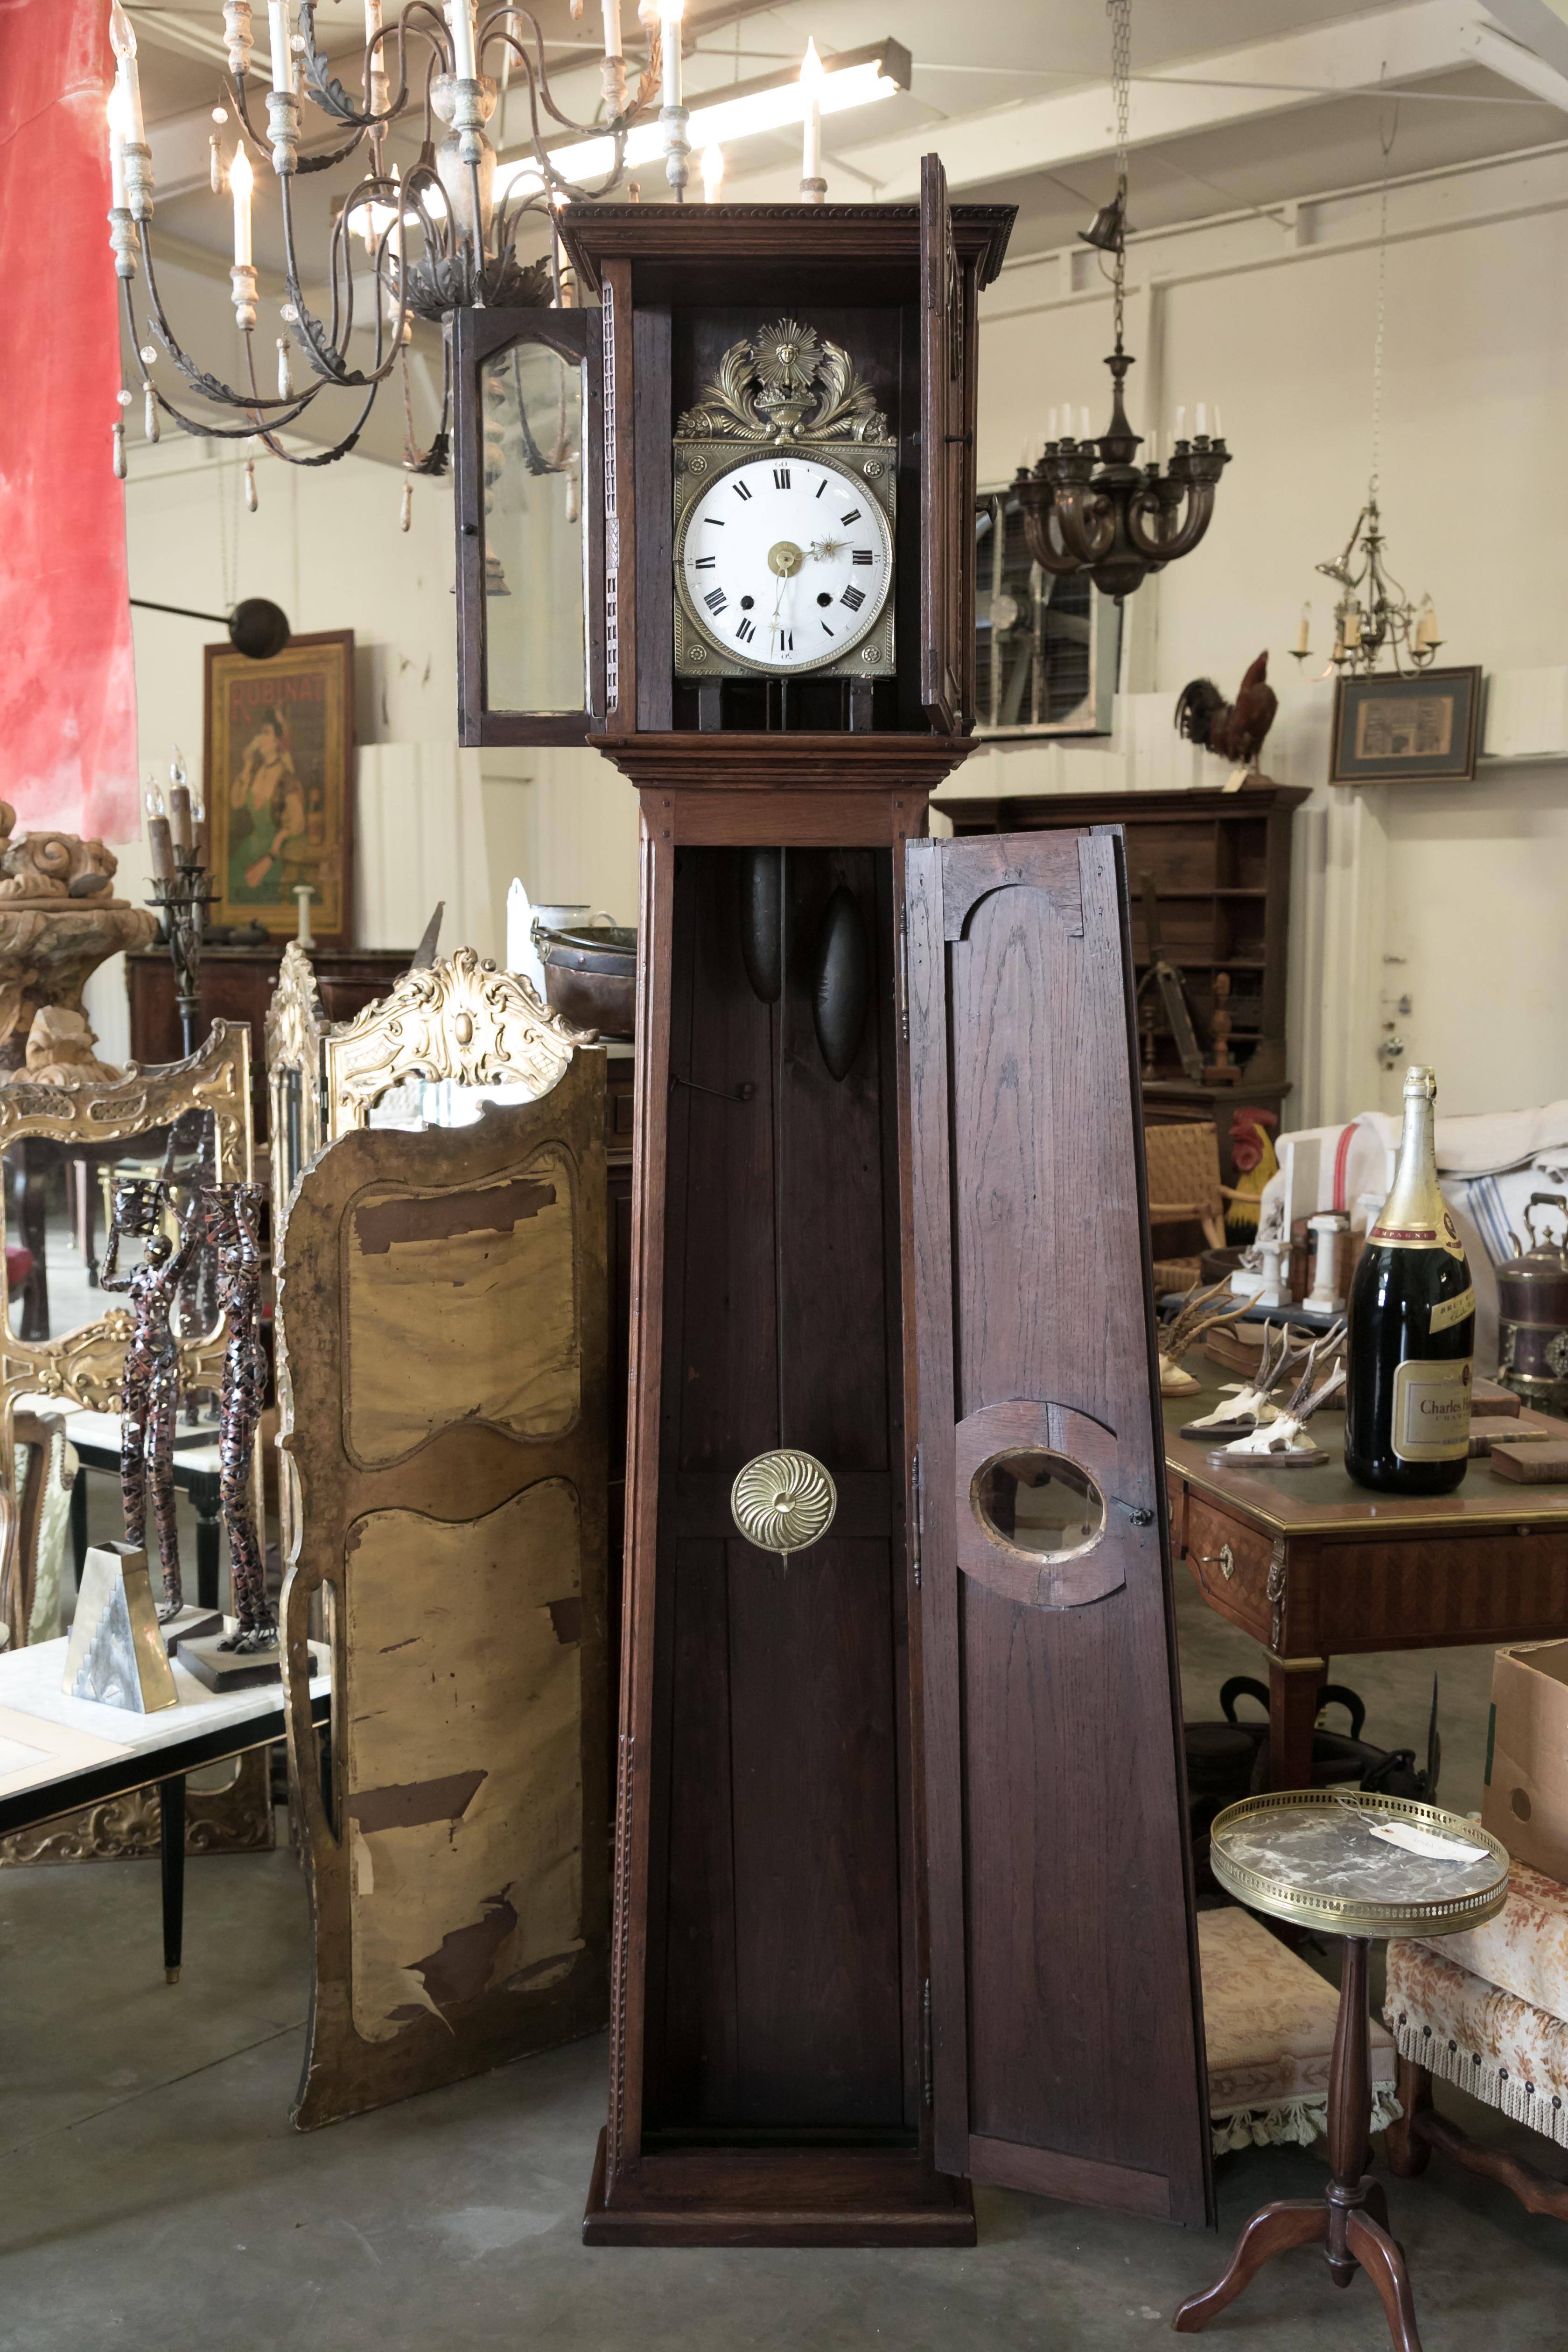 Antique French Louis XVI style 8-day longcase clock, circa early 1800s. The case of this handsome longcase clock was hand crafted of solid oak in Normandie. It houses an enameled dial with Roman numerals and stamped brass hands. Pediment fronton of